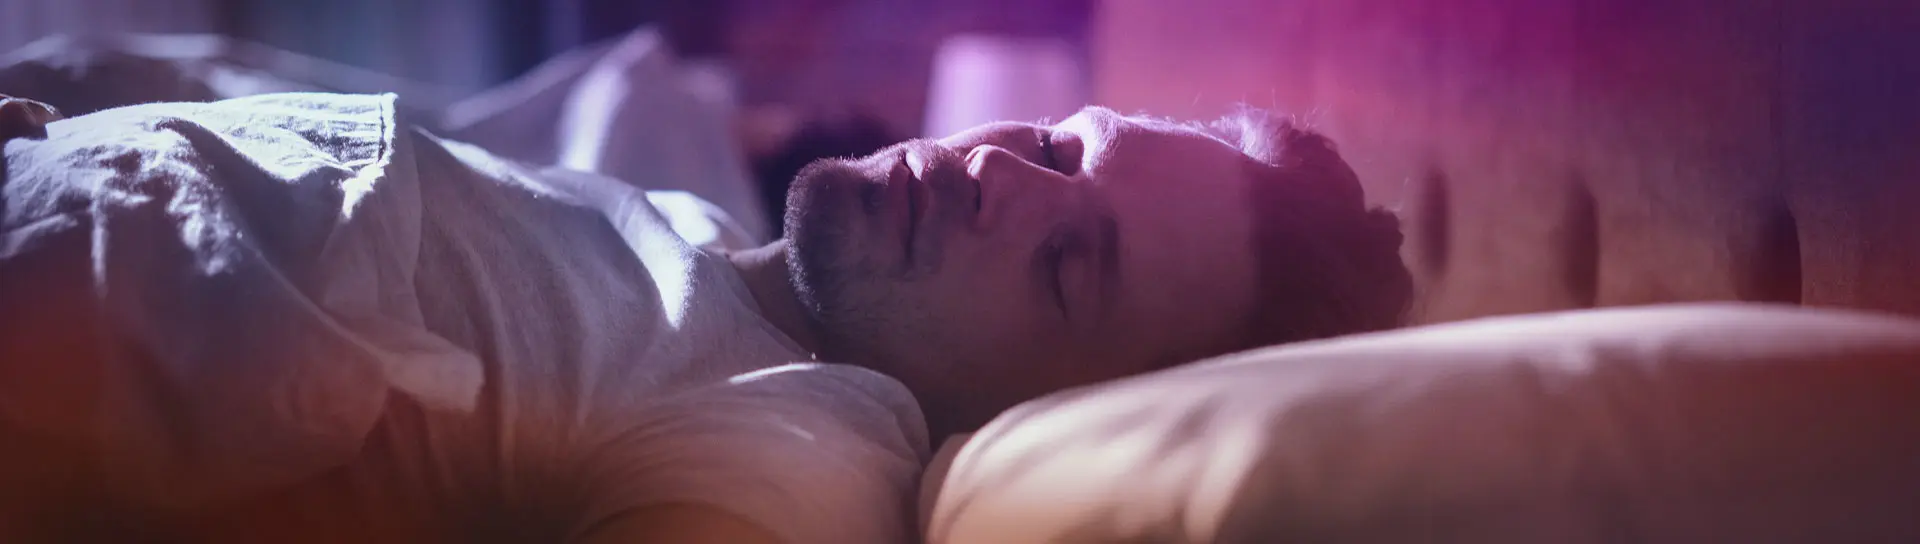 Young man sleeping on a bed, with soft lighting in the room.